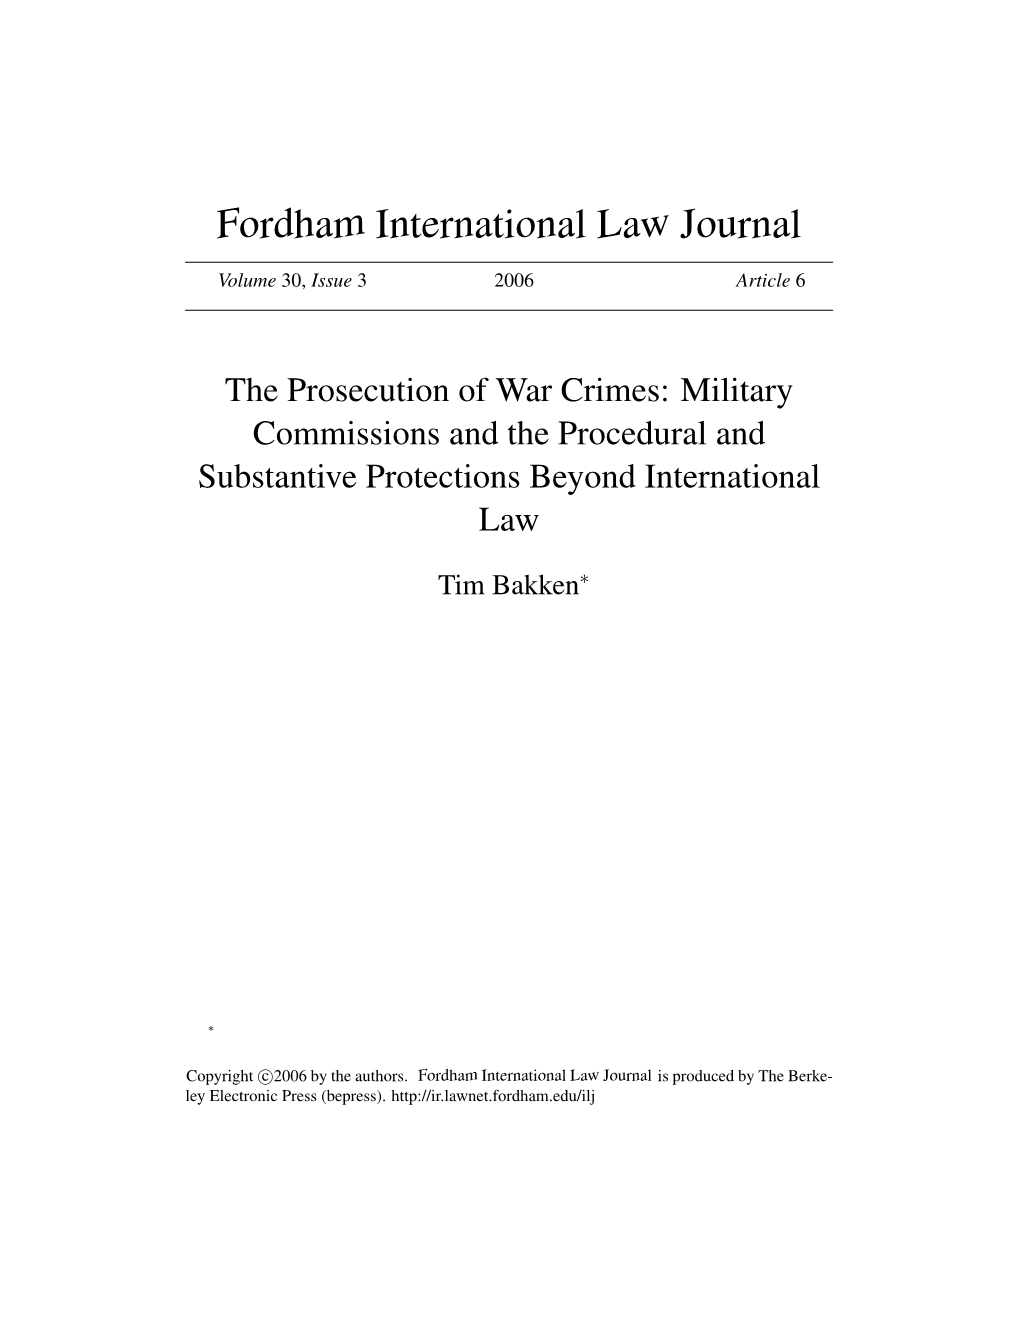 The Prosecution of War Crimes: Military Commissions and the Procedural and Substantive Protections Beyond International Law